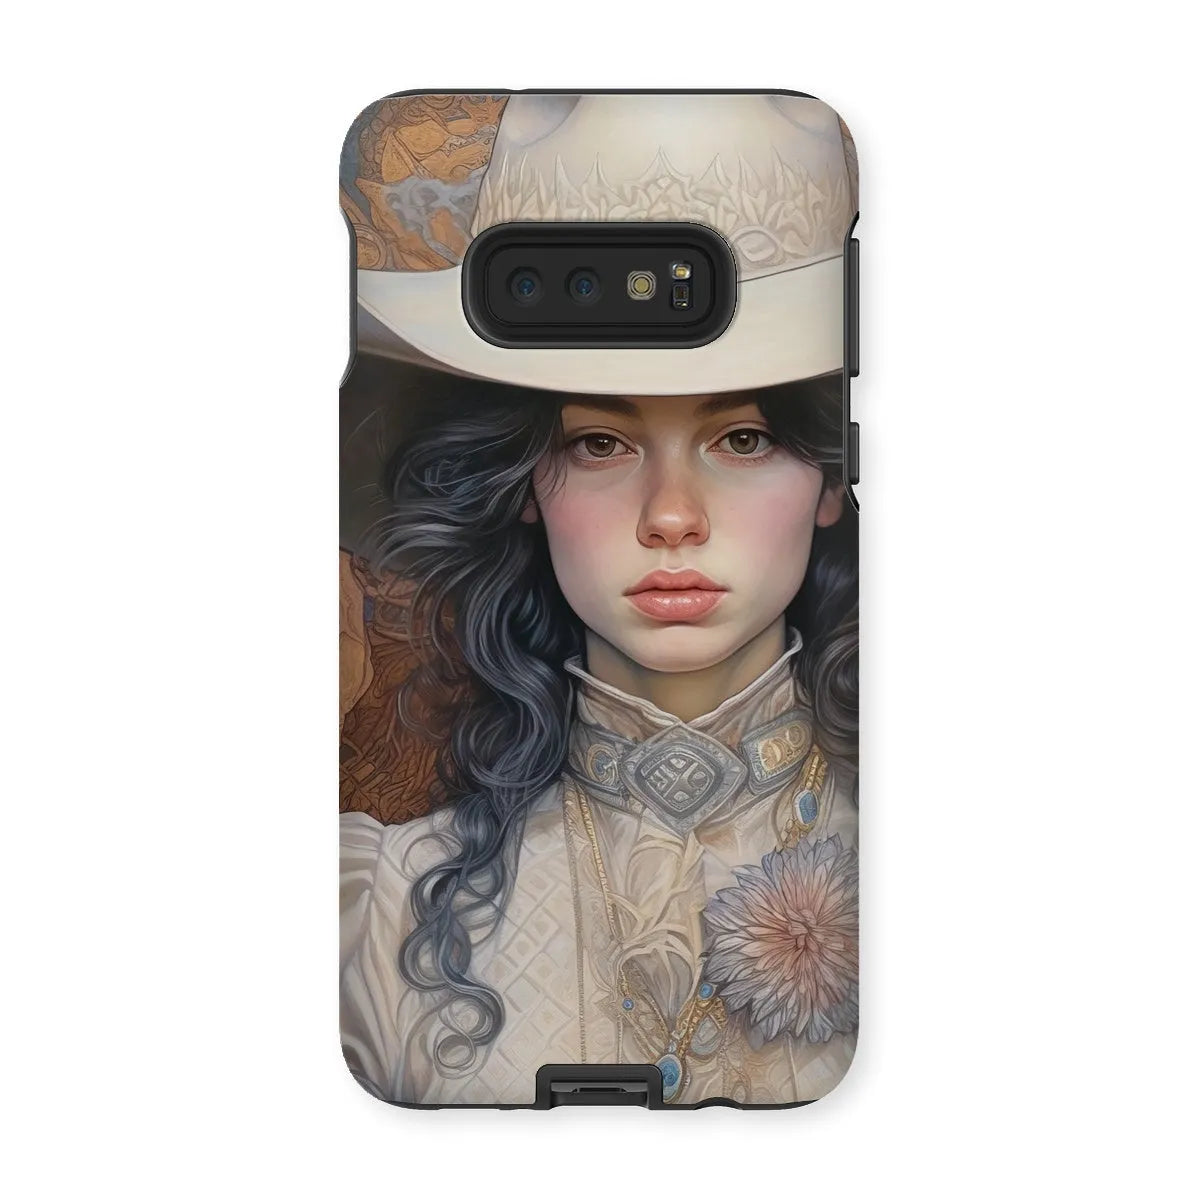 Helena The Lesbian Cowgirl - Sapphic Art Phone Case - Samsung Galaxy S10e / Matte - Mobile Phone Cases - Aesthetic Art